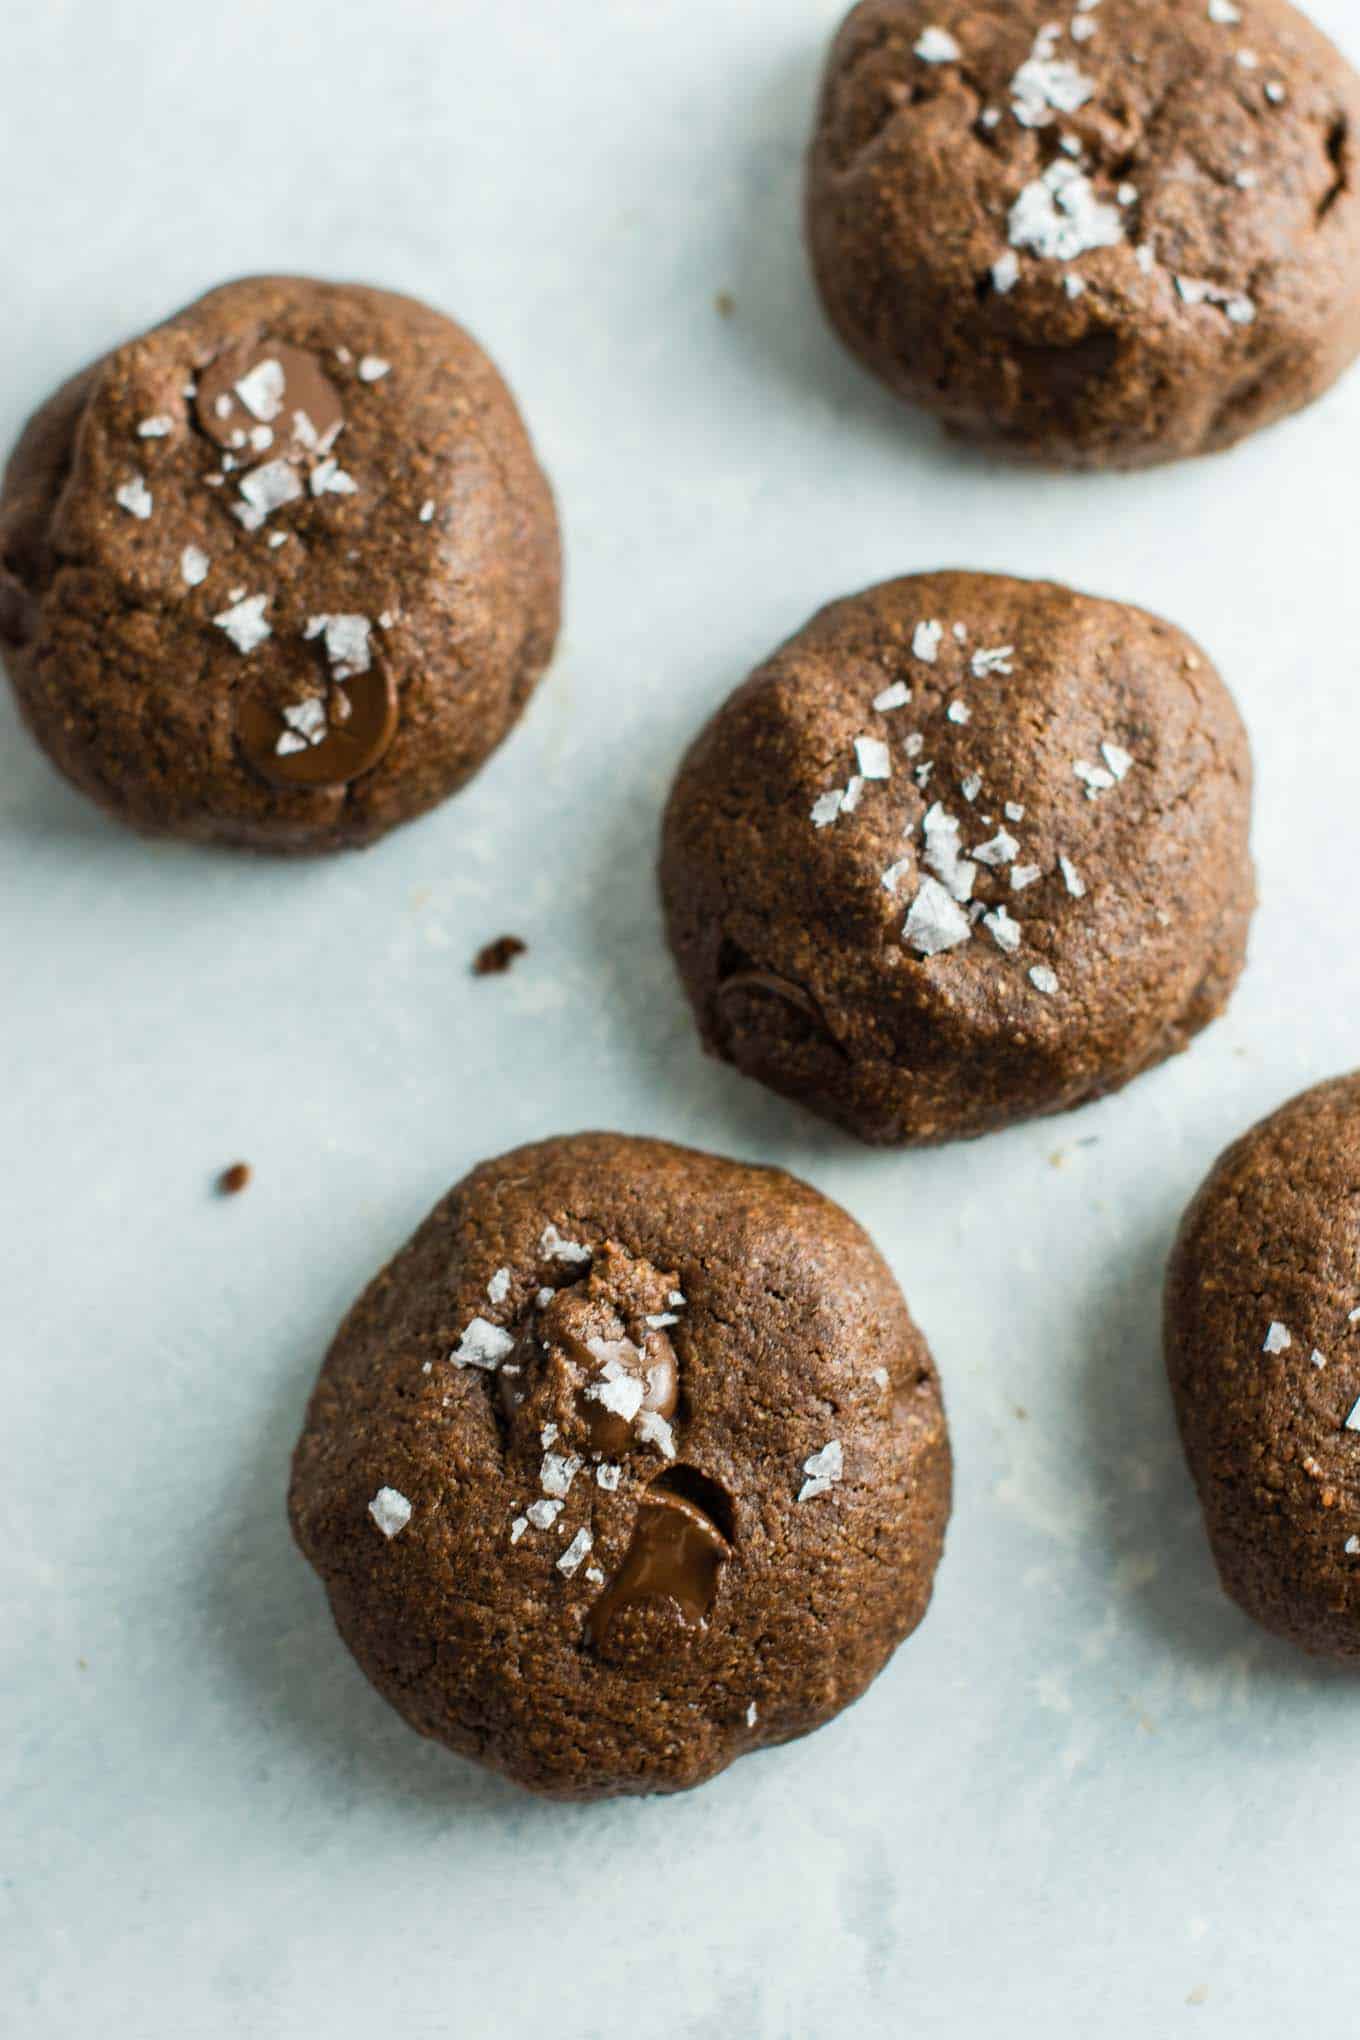 Healthy double chocolate chip cookies with sea salt. So decadent and delicious and made healthier with coconut oil! #doublechocolatechipcookies #healthycookies #dairyfree #dessert #healthy